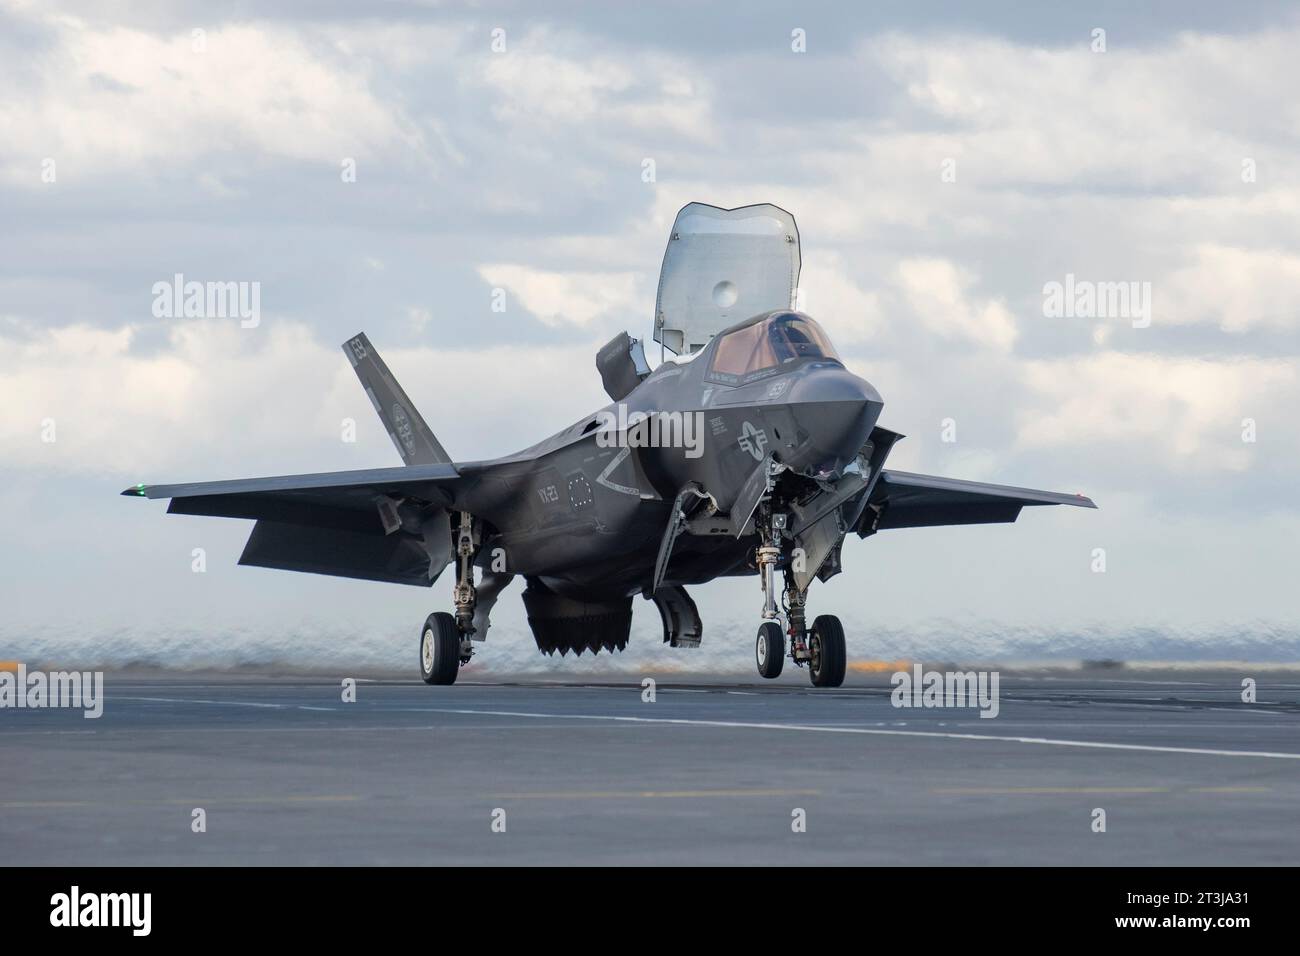 Patuxent River, United States. 24th Oct, 2023. A U.S Marine Corps F-35B Lightning II stealth fighter aircraft performs a shipborne rolling vertical landing on the flight deck of the Royal Navy Queen Elizabeth-class aircraft carrier HMS Prince of Wales during developmental test phase 3 flight trials, October 24, 2023 off the coast of Maryland, USA. Credit: Kyra Helwick/U.S. Navy Photo/Alamy Live News Stock Photo